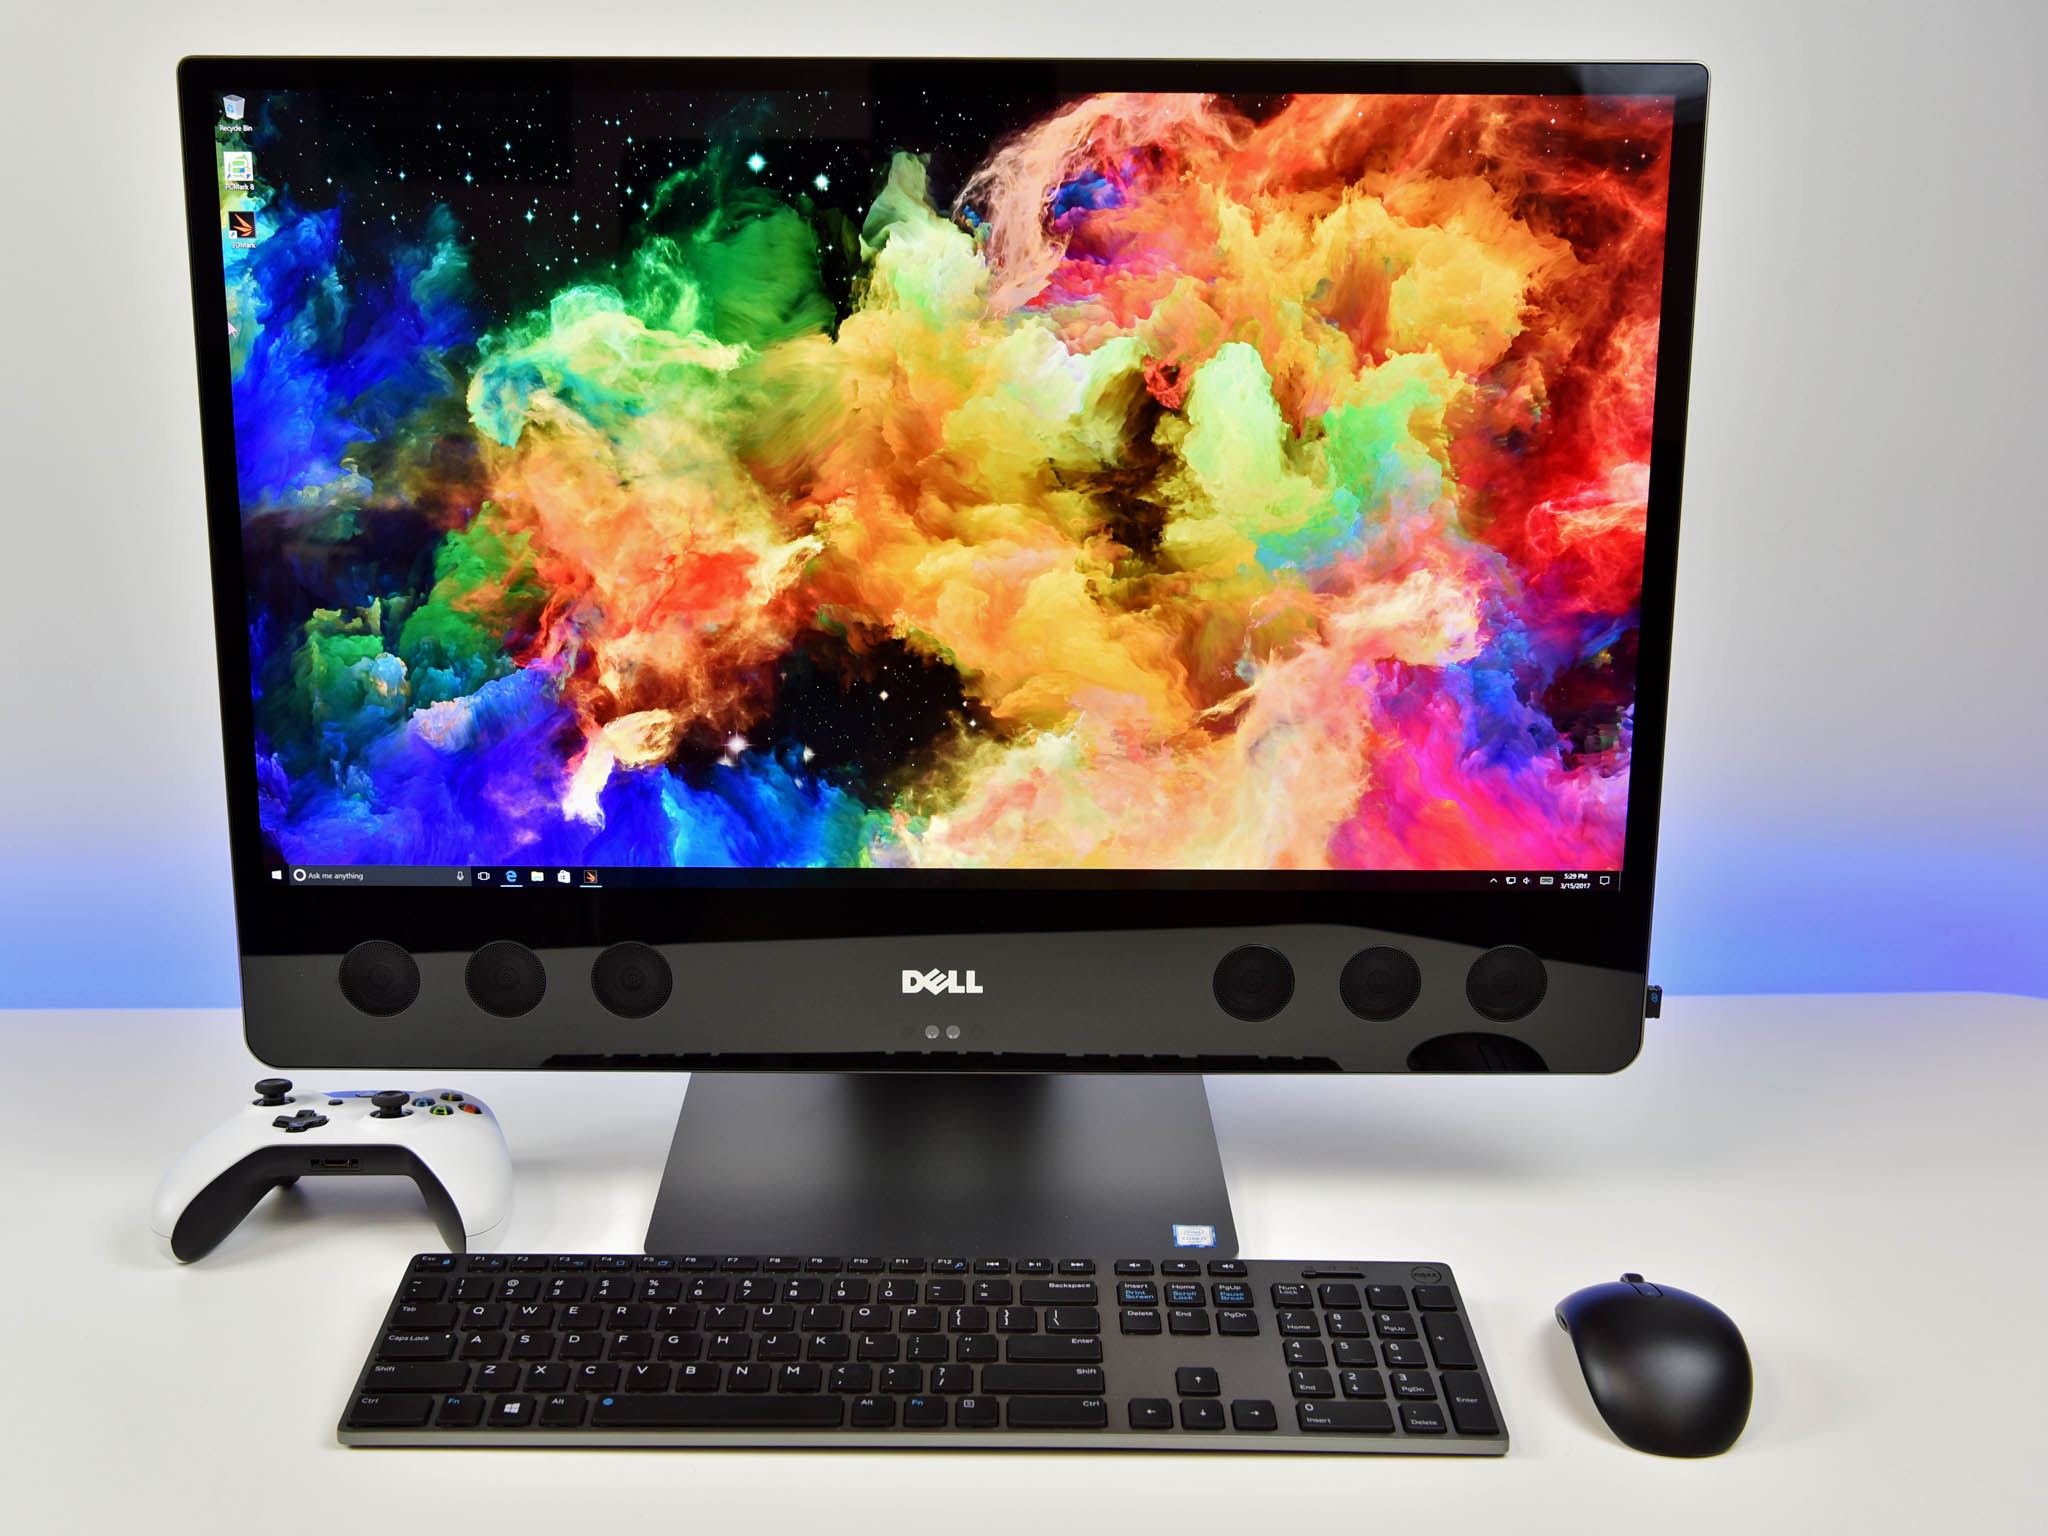 Dell XPS 27 with a touchscreen.